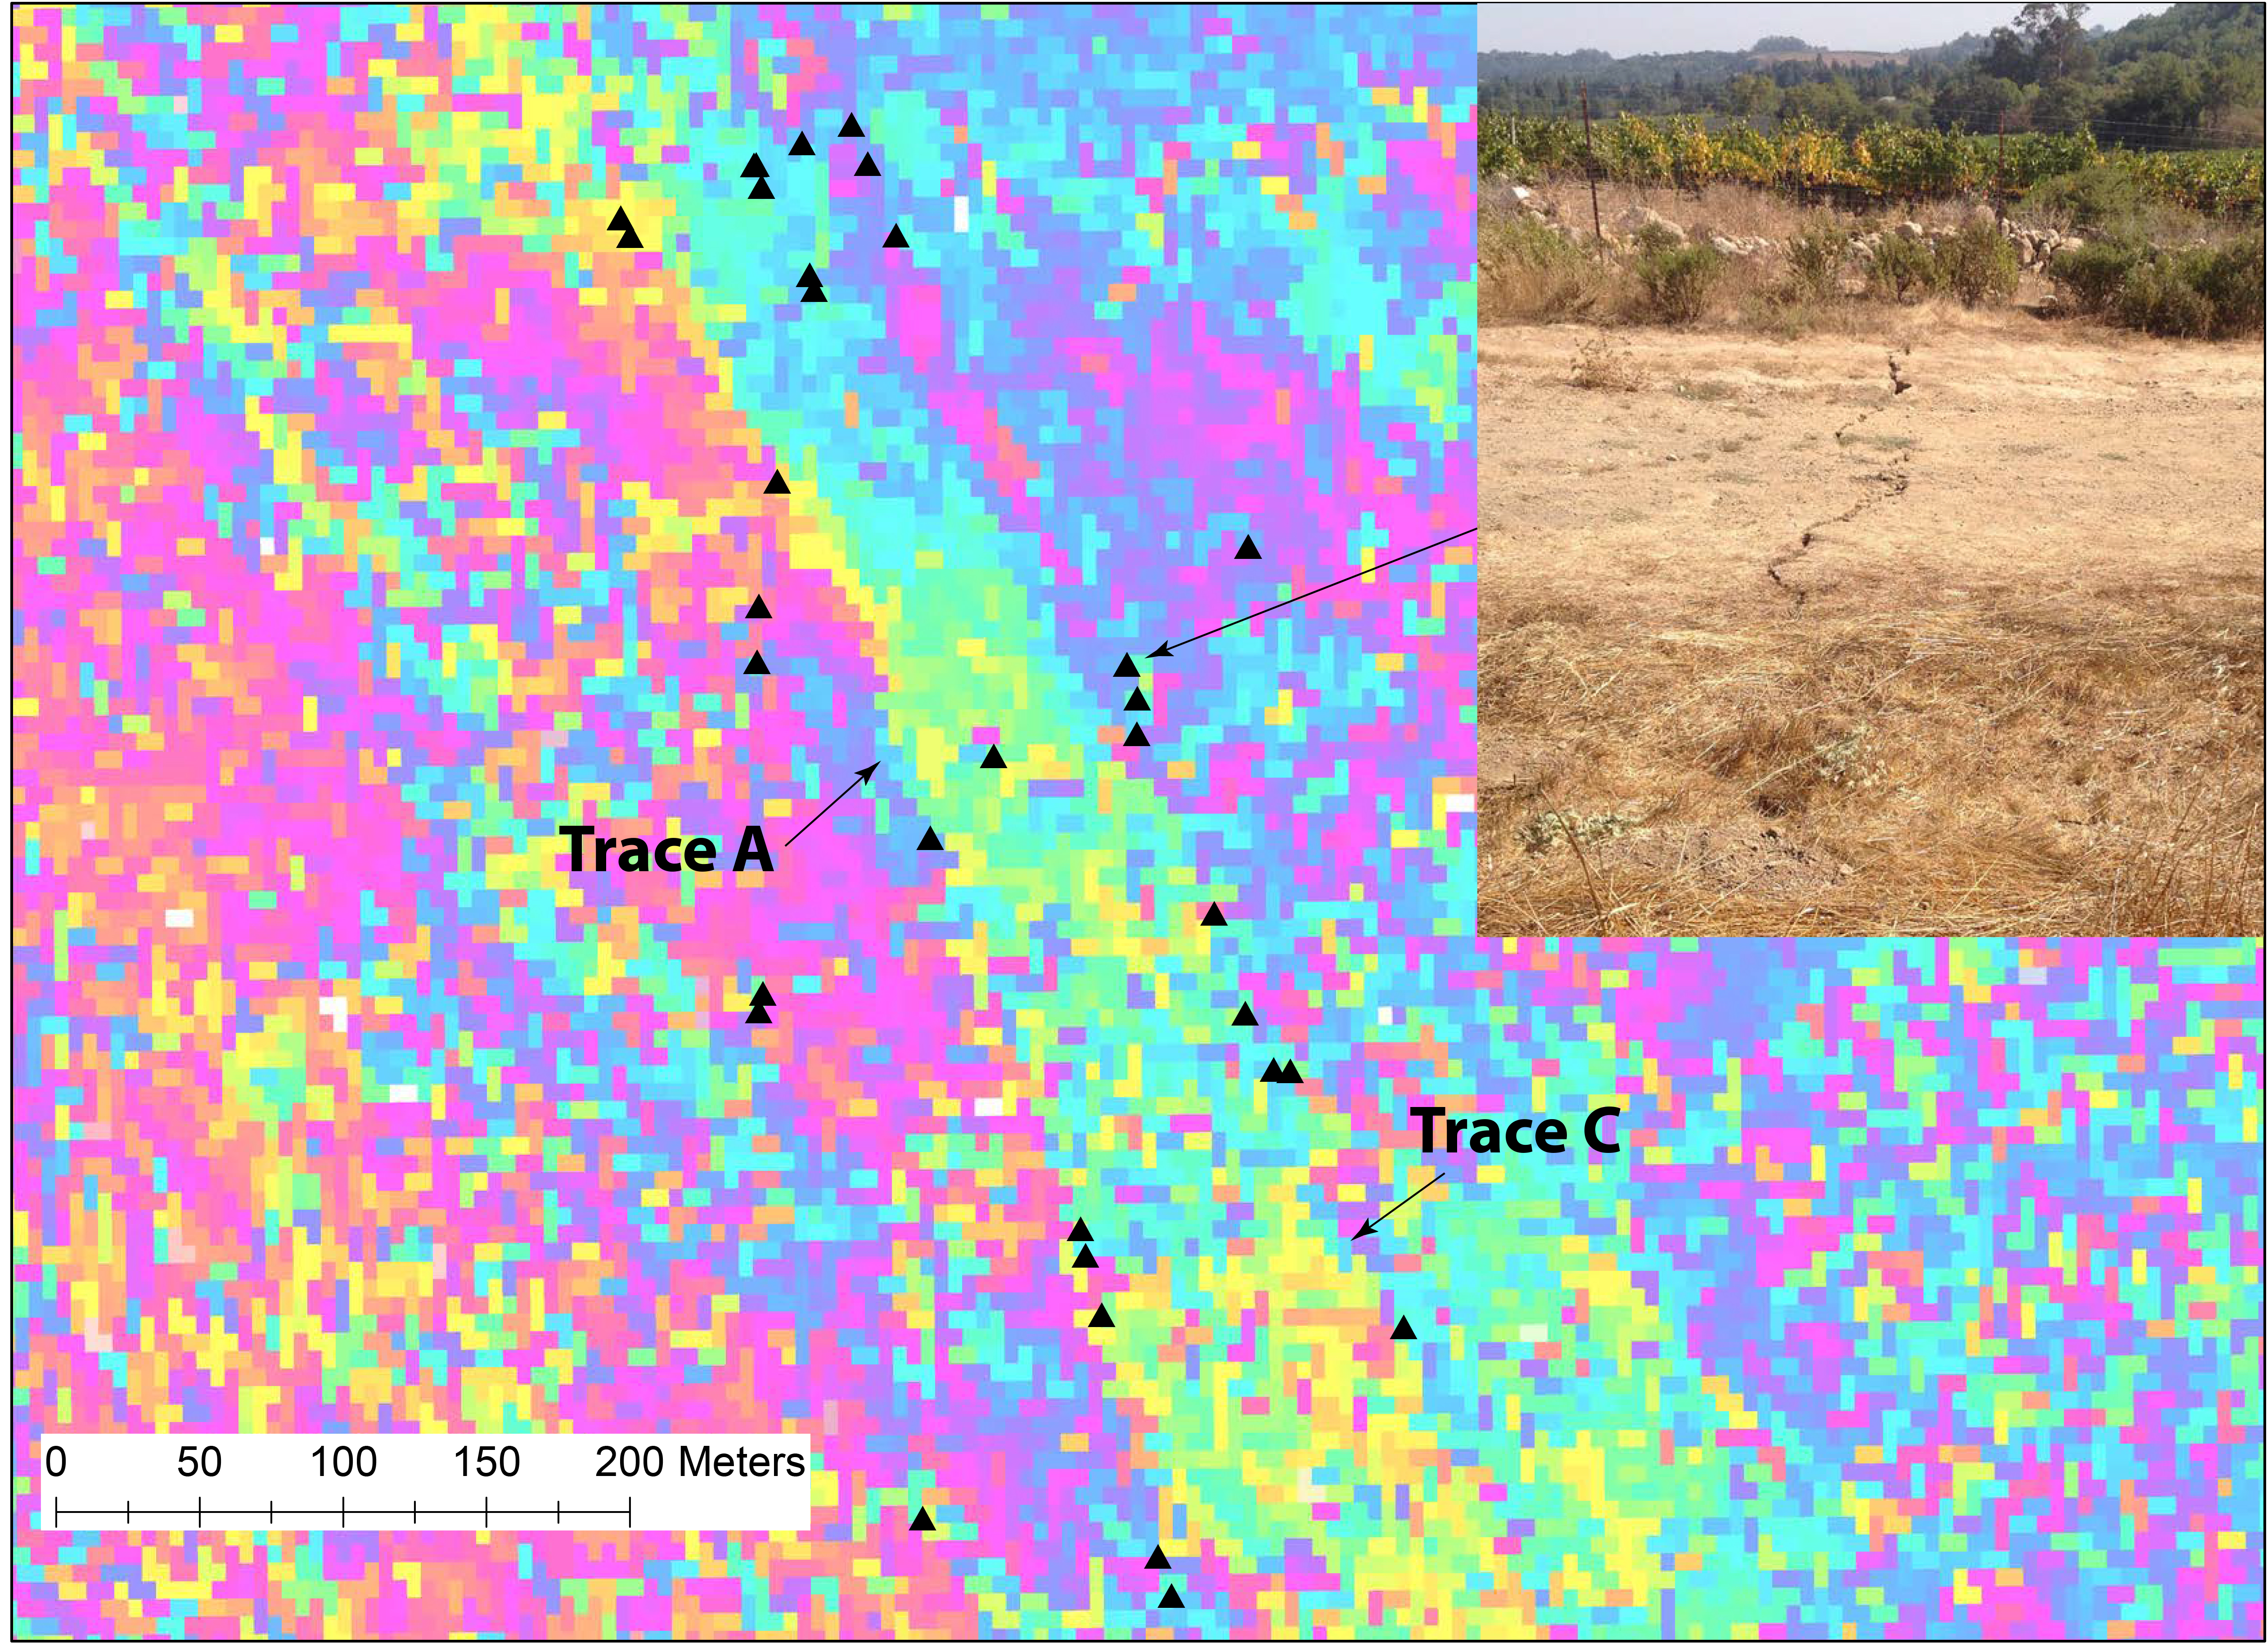 Portion of UAVSAR interferogram (Line 23511) near the northern end of the South Napa earthquake rupture zone, showing lineaments associated with the principal fault trace (Trace A), where the largest displacements and postseismic slip was observed, and a secondary trace (Trace C). Triangles are field locations where ground cracks have been observed. UAVSAR imagery was instrumental in directing field crews to locations where small-displacement faulting could be documented (photo; 6 cm dextral slip on Trace C).